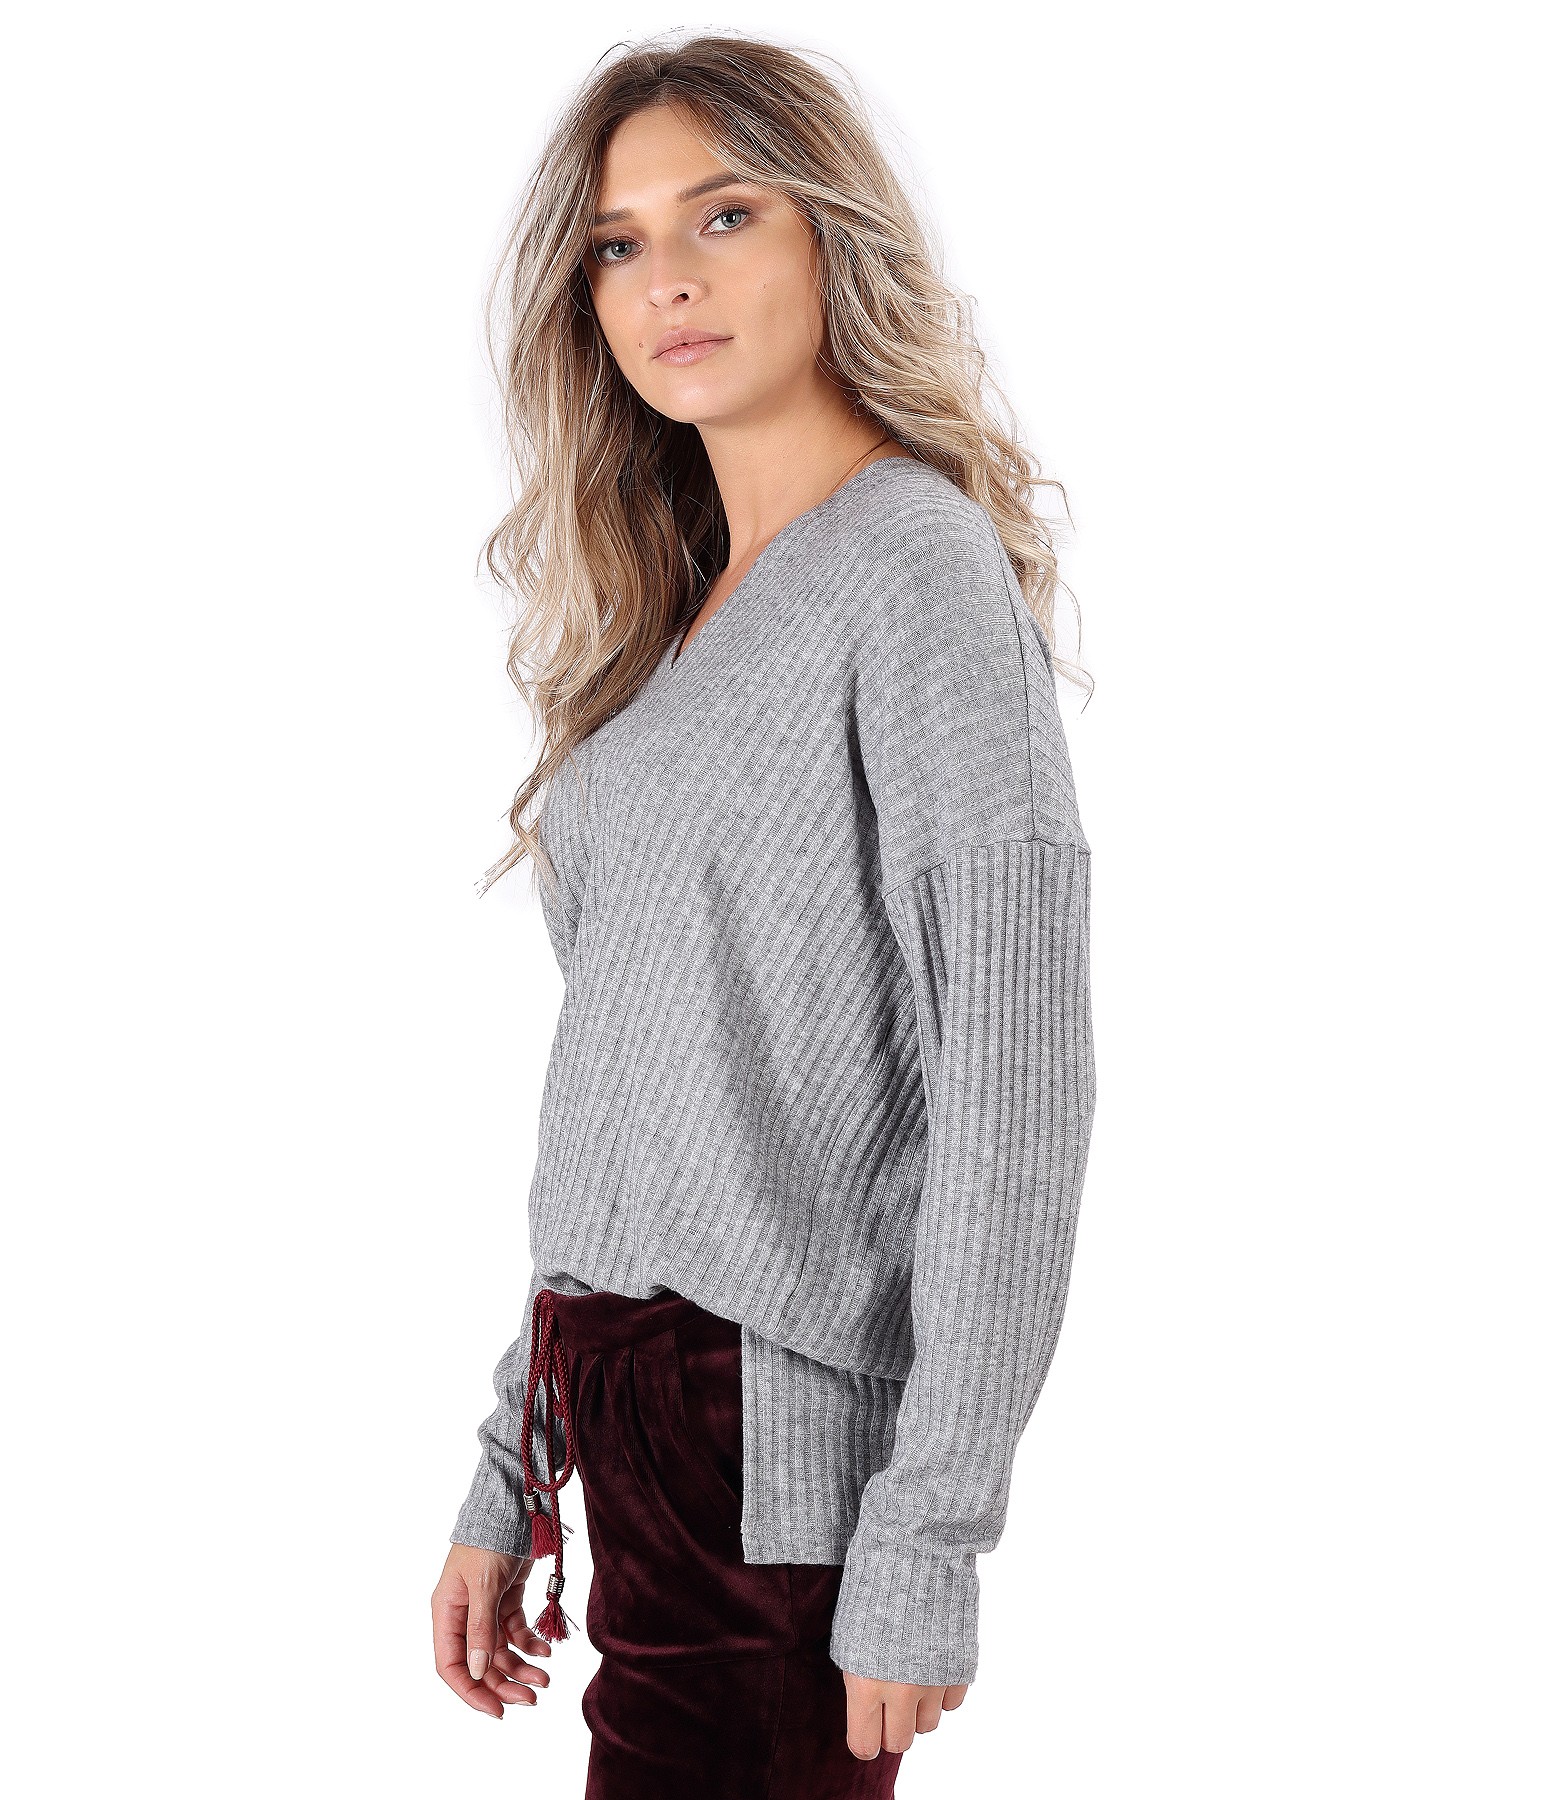 Elastic jersey casual blouse with side slits grey - YOKKO